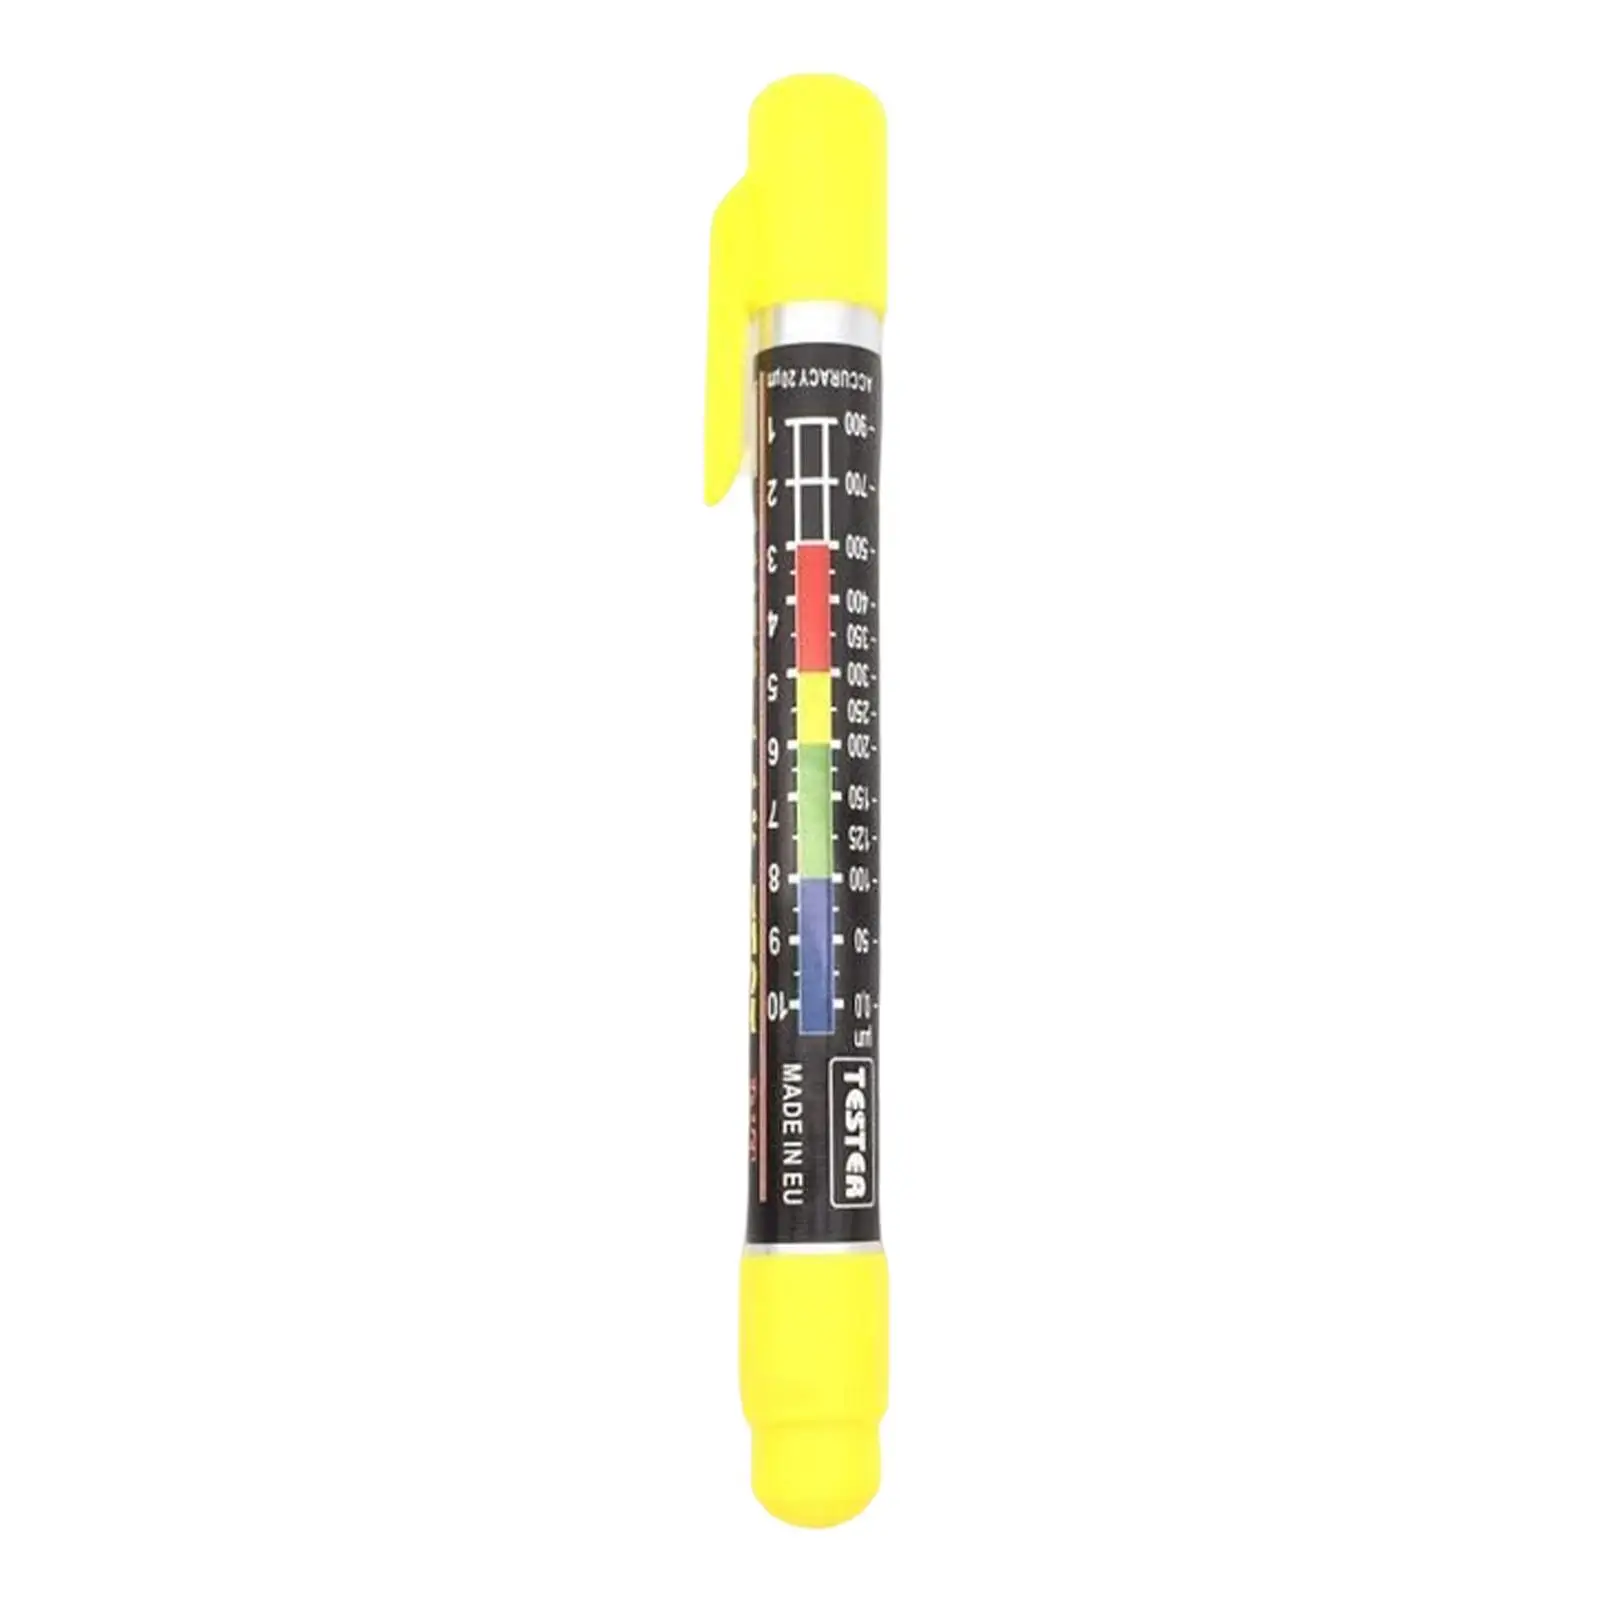 Paint Thickness Gauge Coating Tester Paint   for Verifying Car